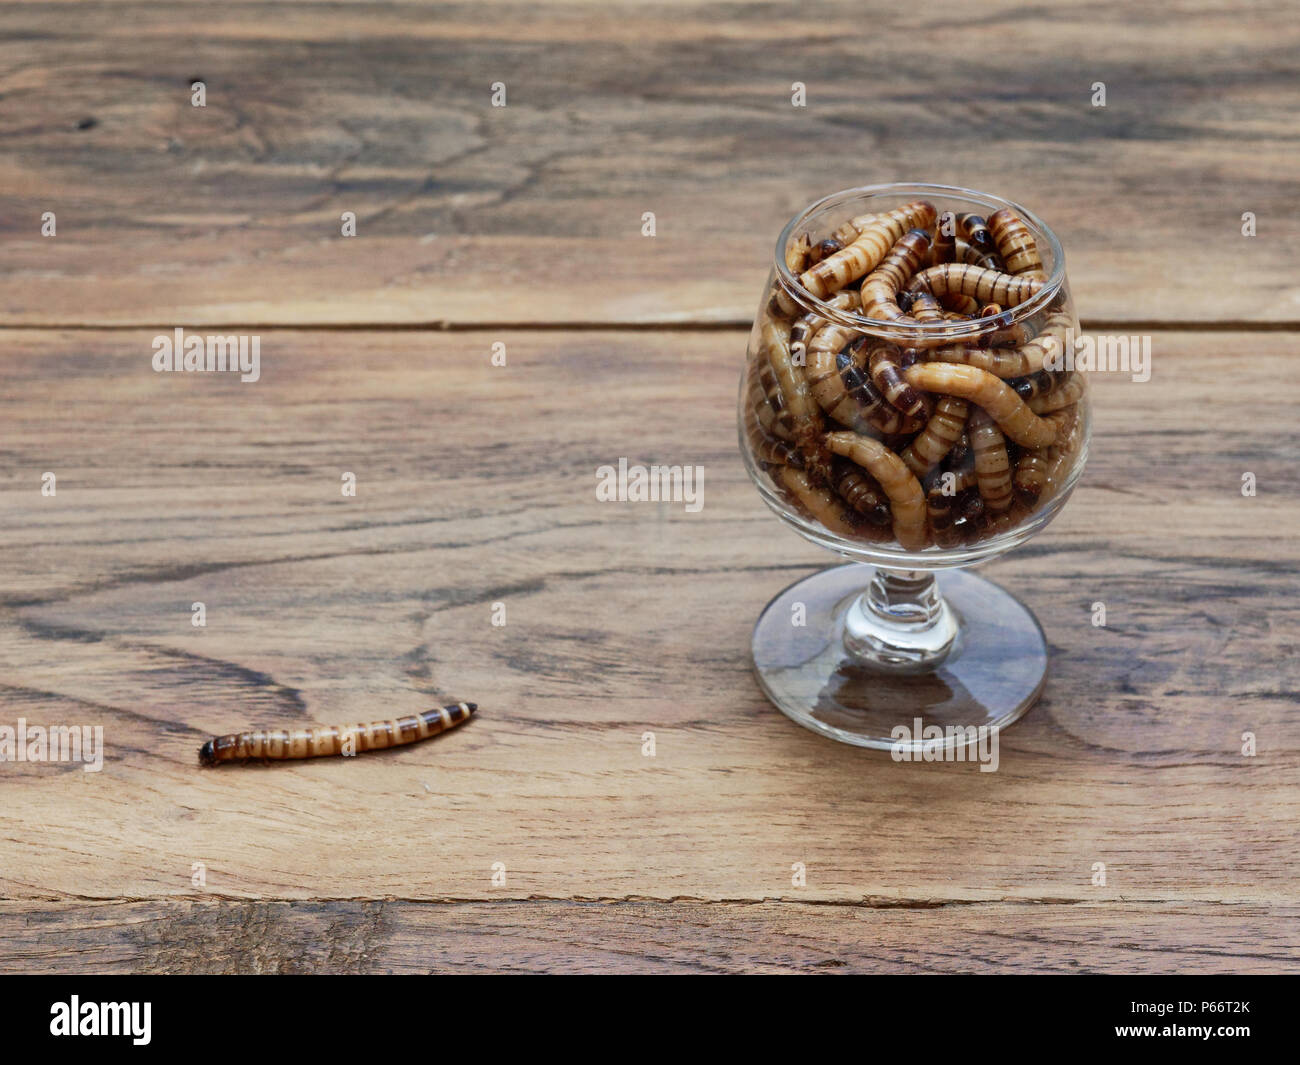 A super worm and group of super worms inside small brandy glass over dark  wooden surface